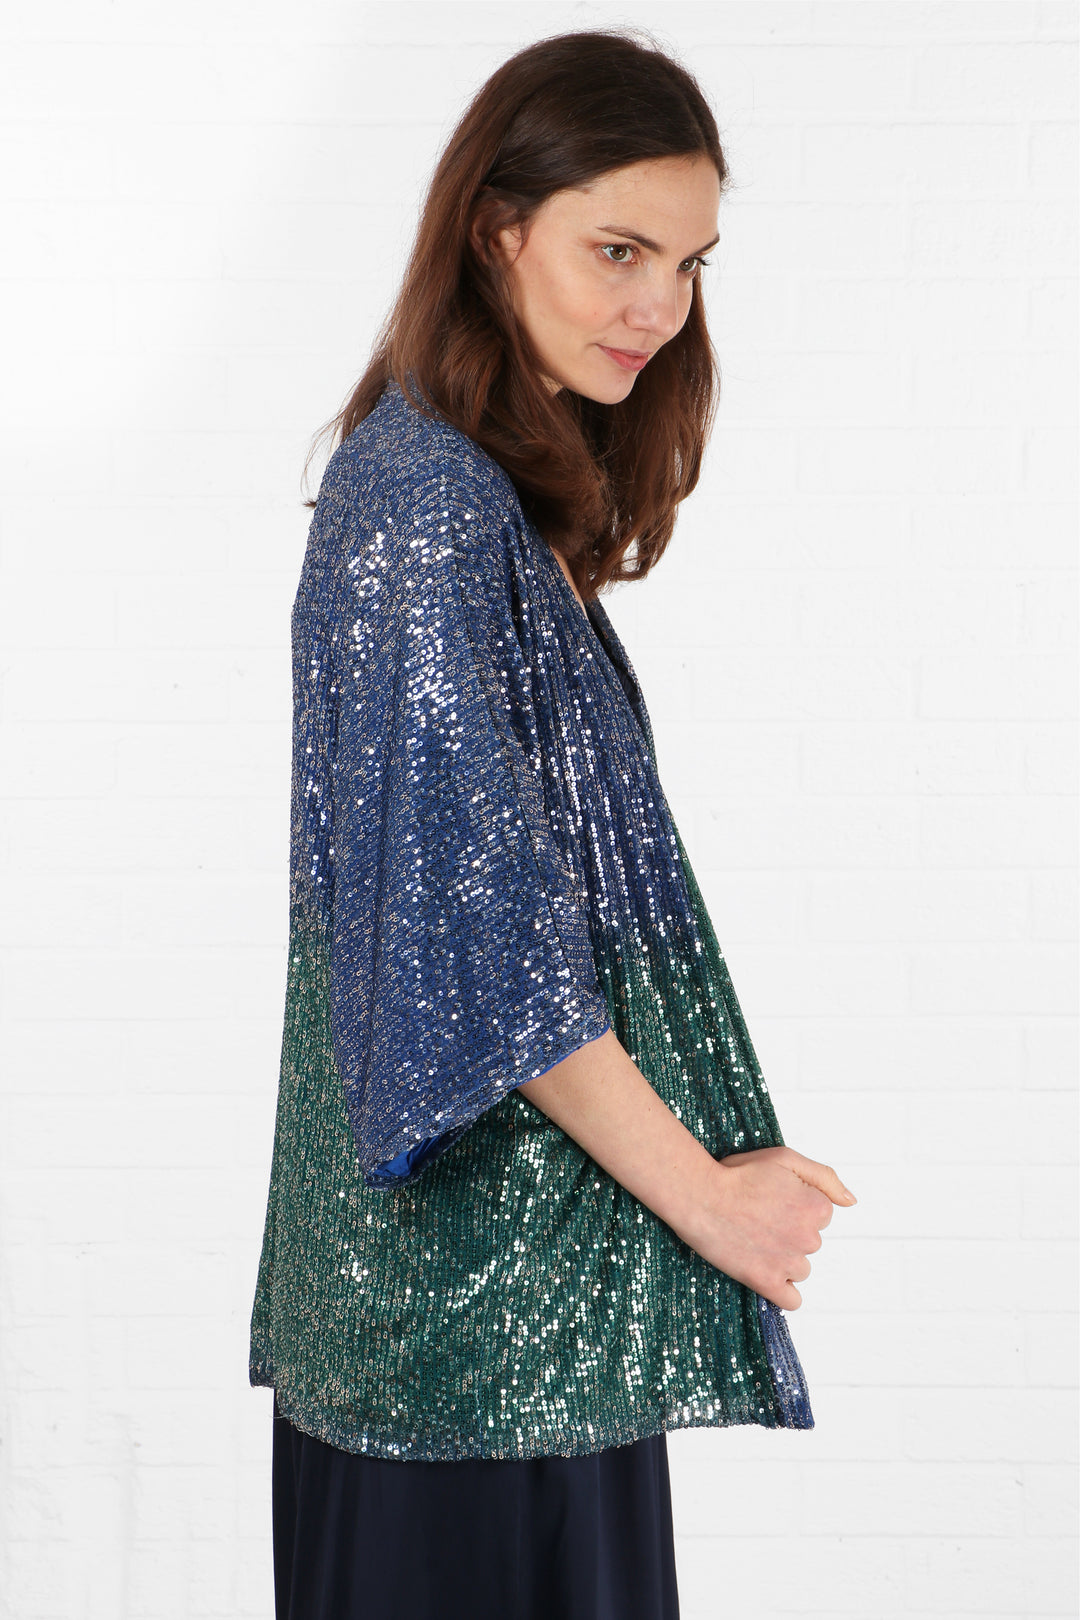 model showing the side view of the kimono jacket, showing all over sequin coverage in blue and green ombre